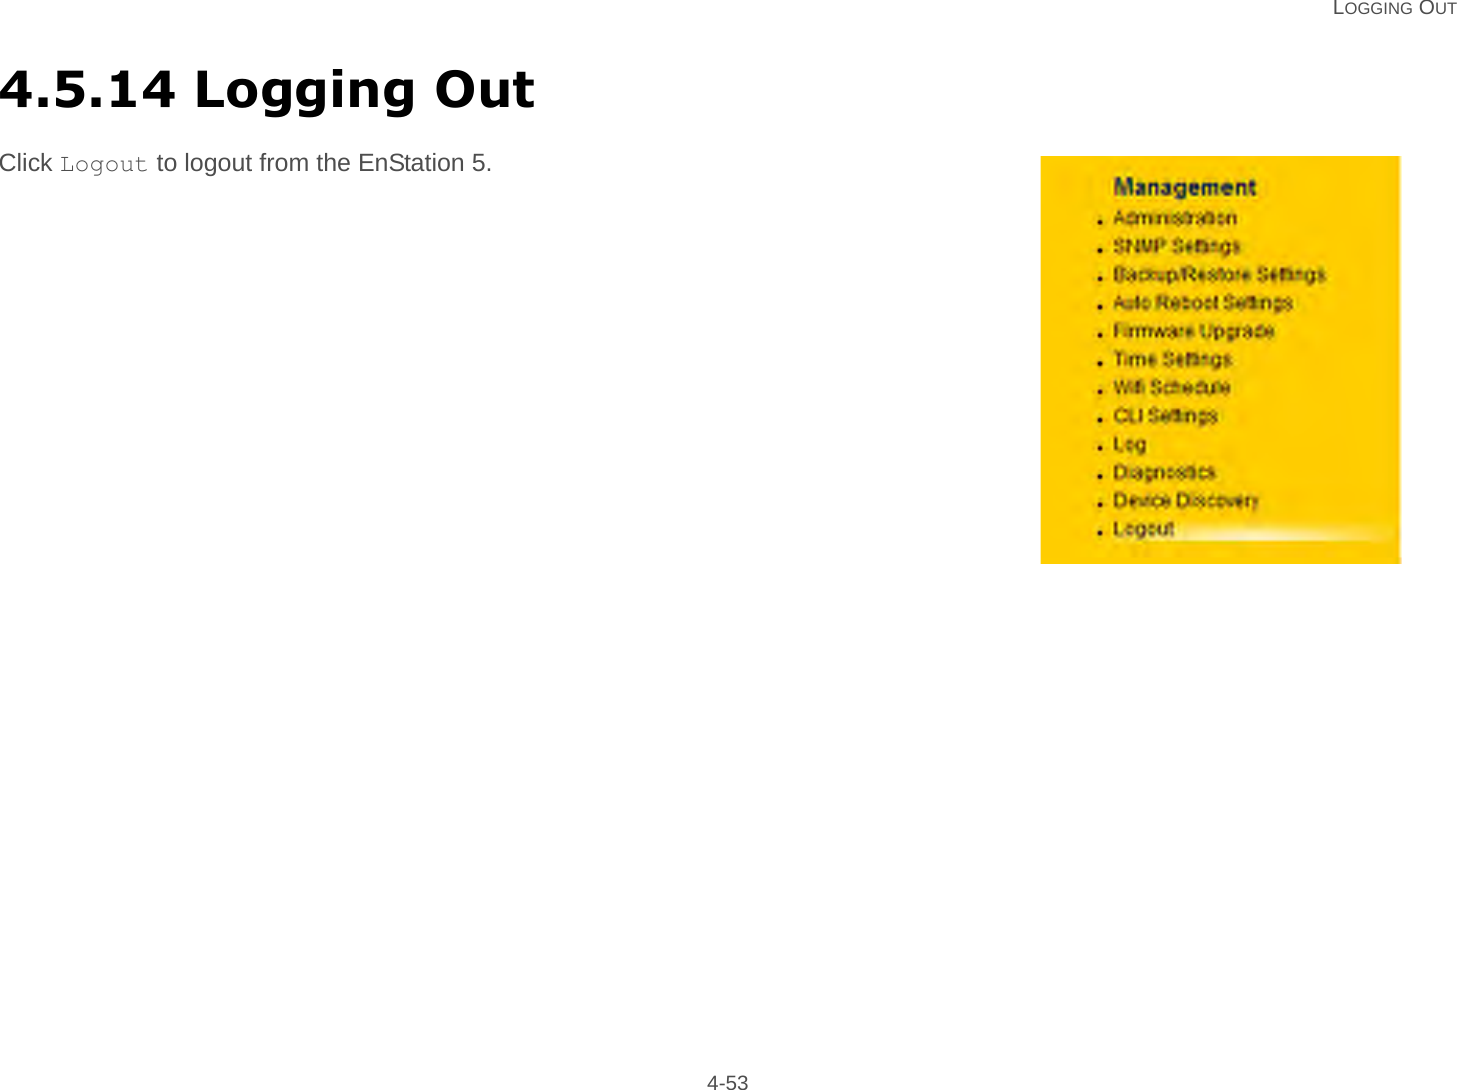   LOGGING OUT 4-534.5.14 Logging OutClick Logout to logout from the EnStation 5.